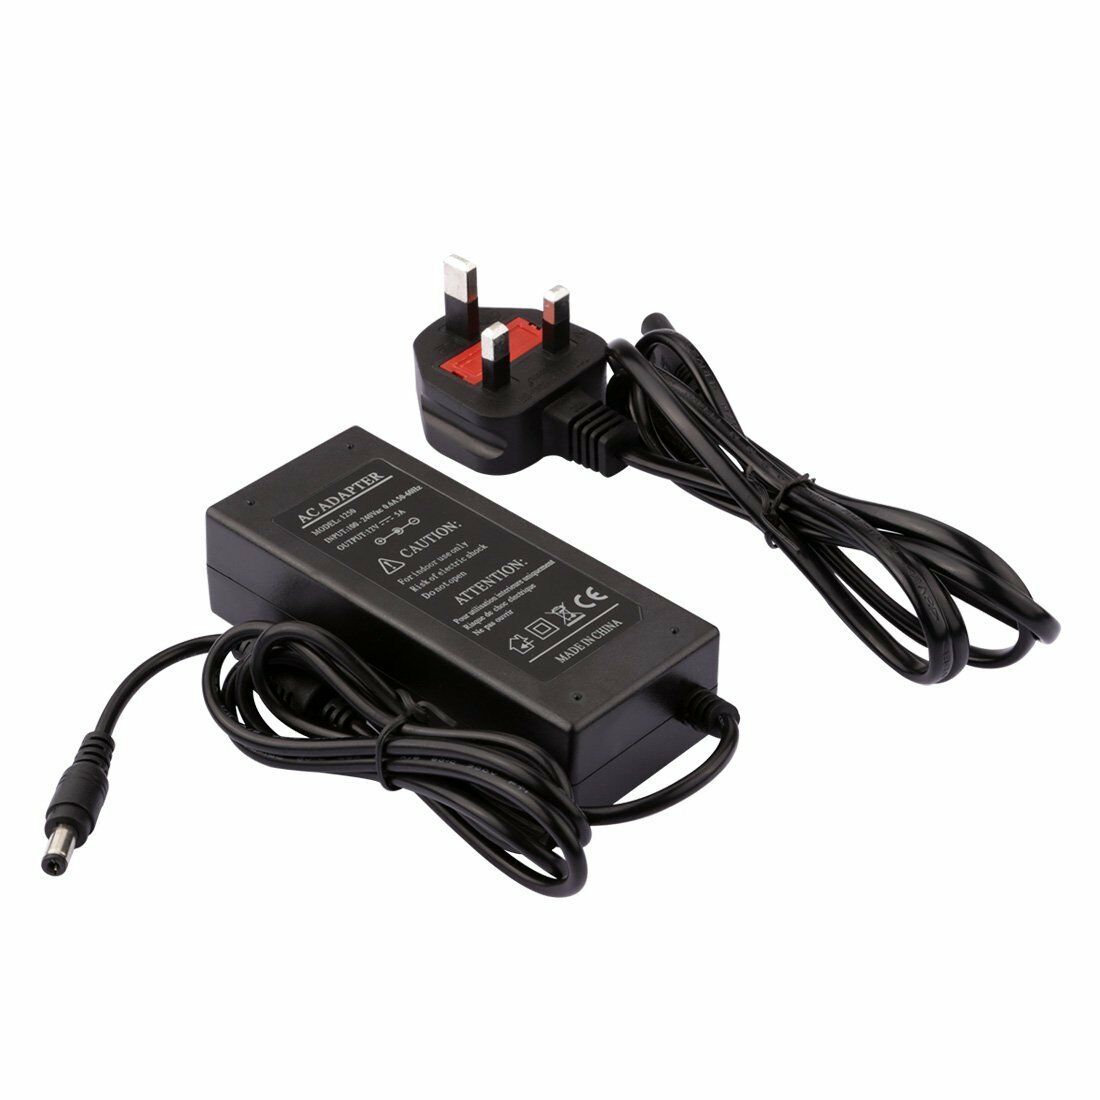 AC DC 12V 5A Power Supply Adapter Charger Transformer for 3528/5050 LED Strip